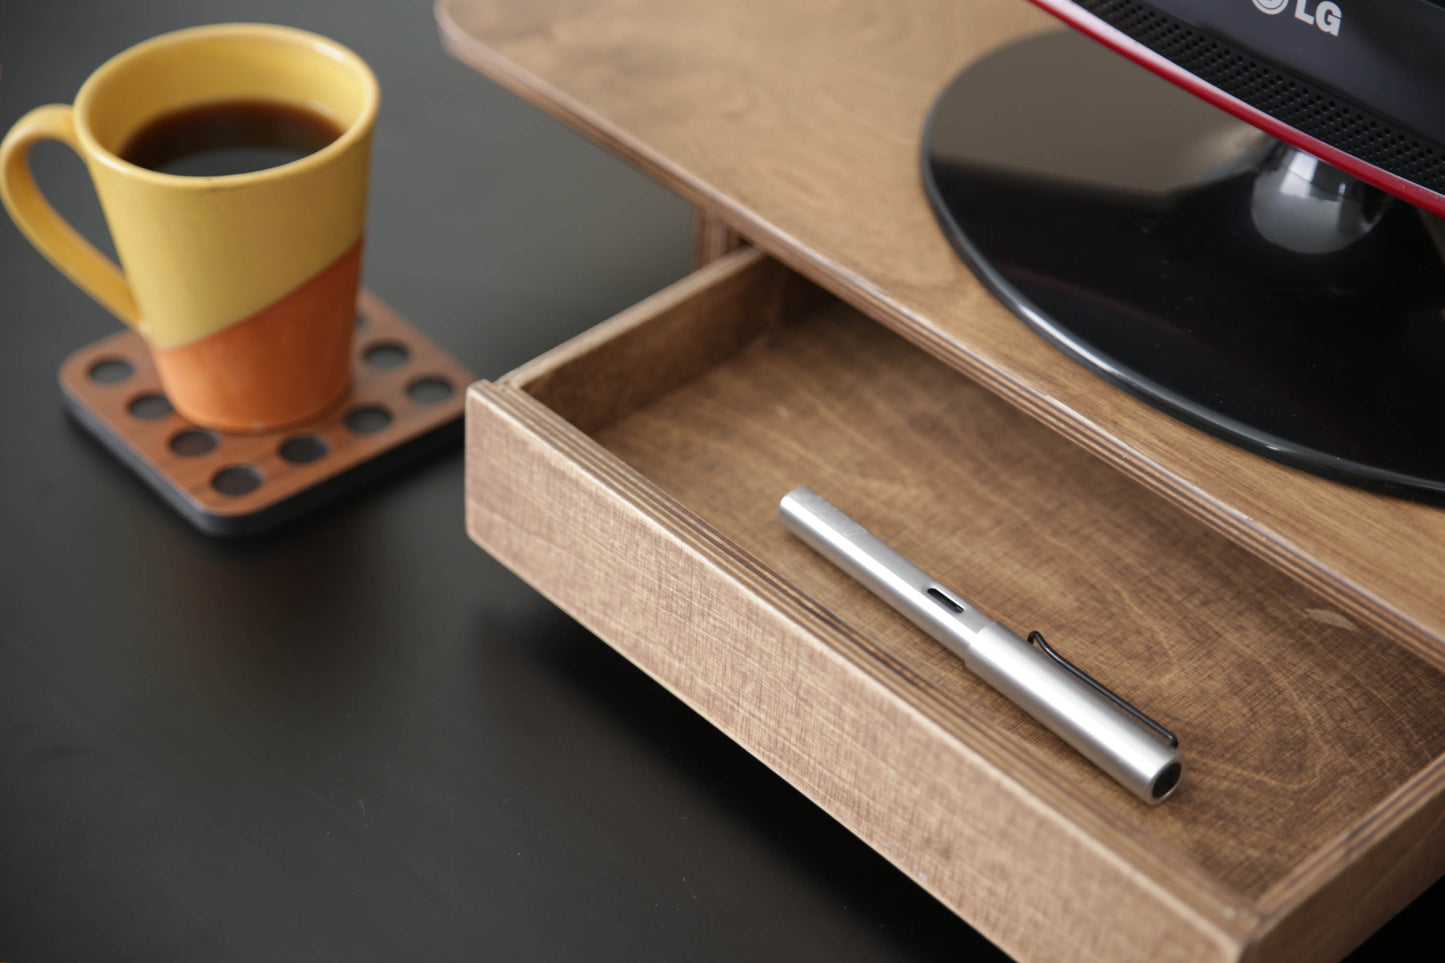 Wooden Monitor Stand for Desk